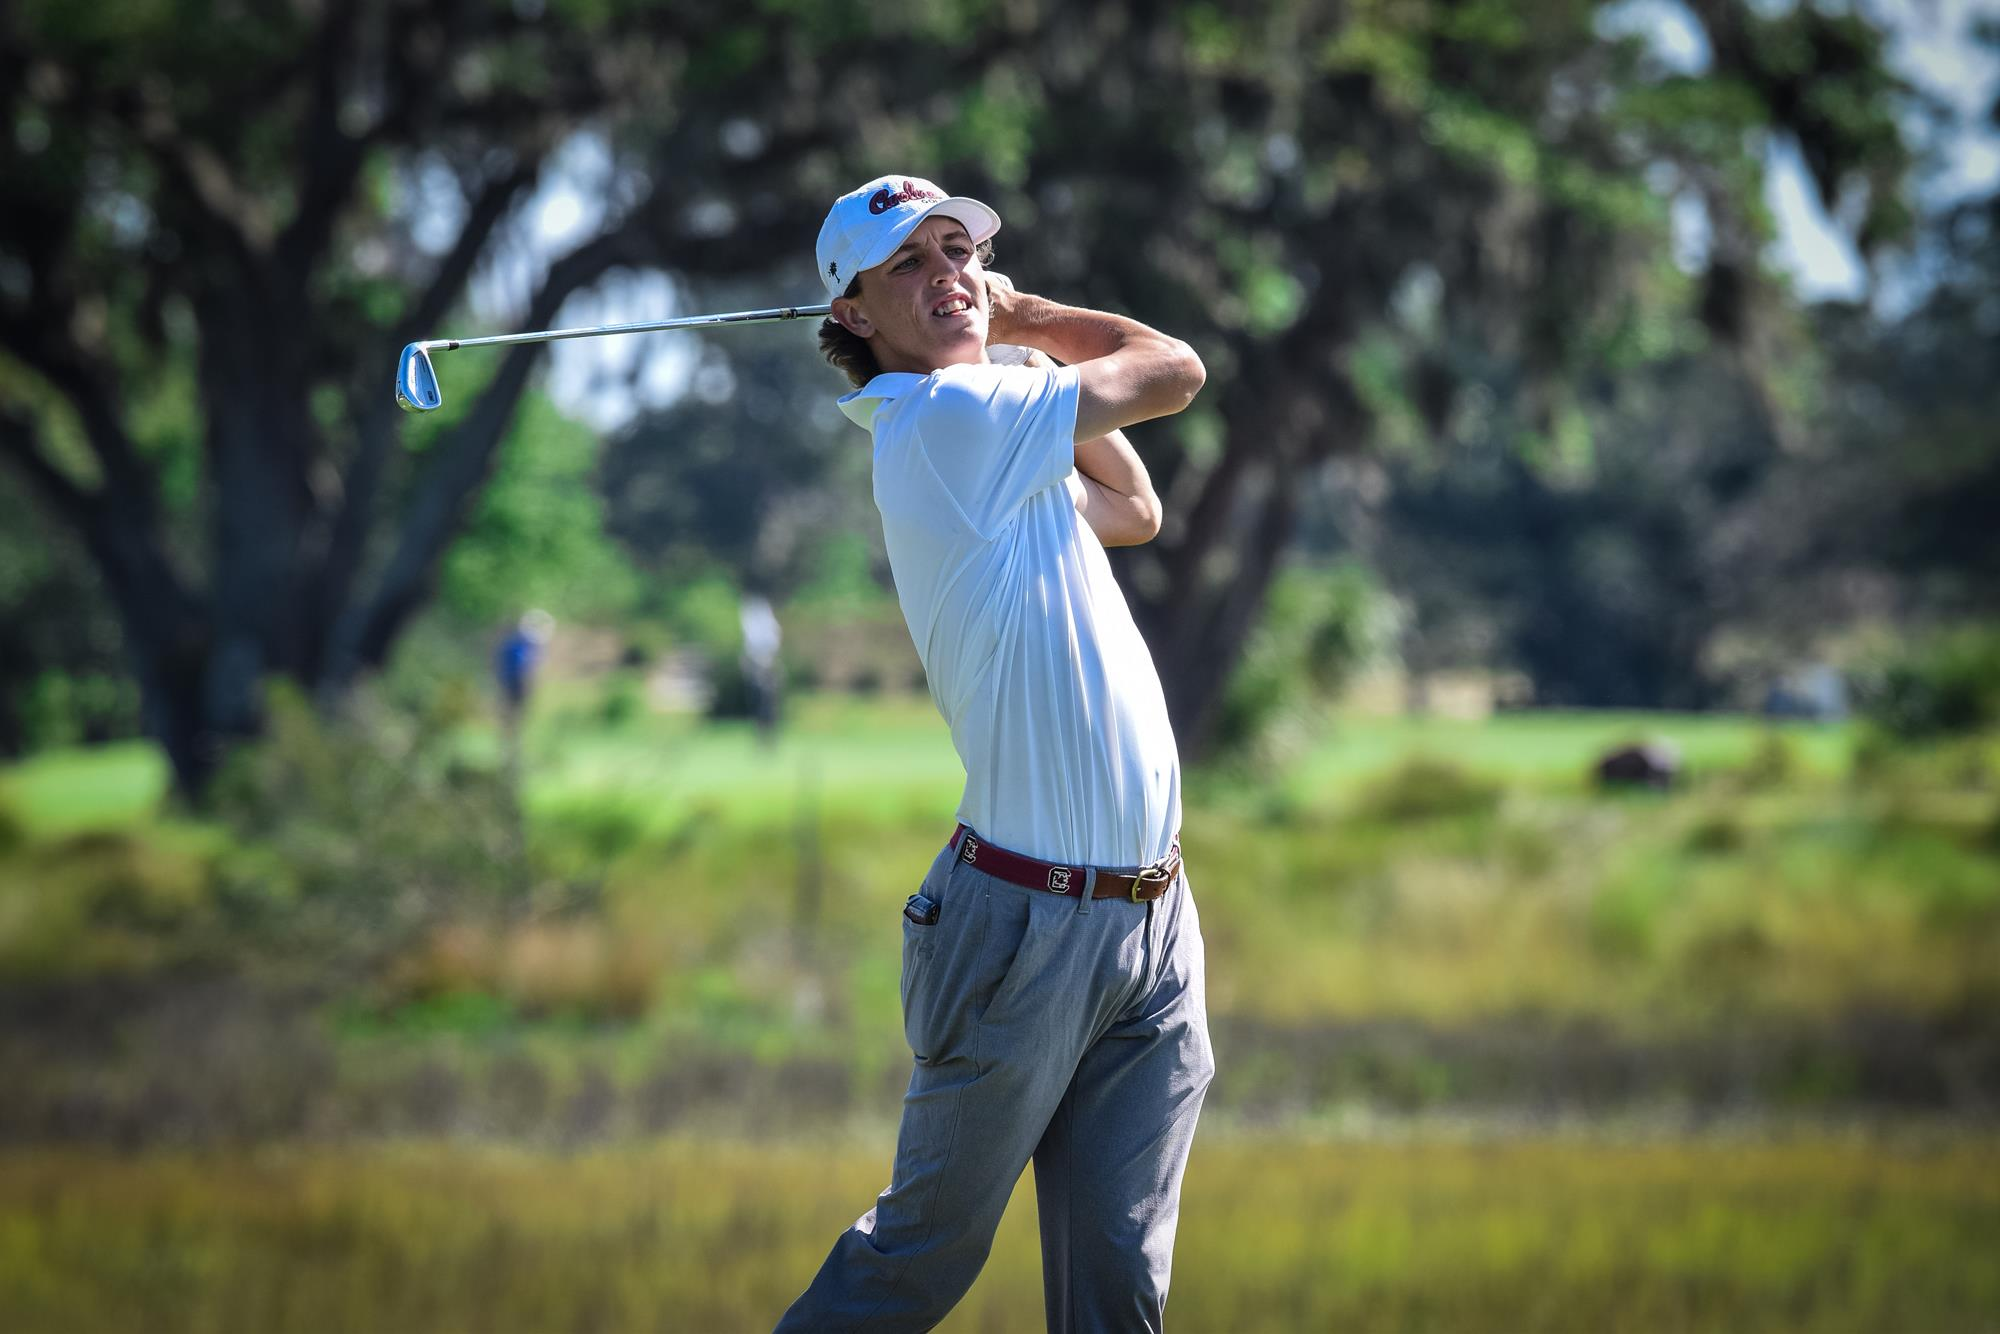 Wilson Tied for Lead at Carpet Capital Collegiate